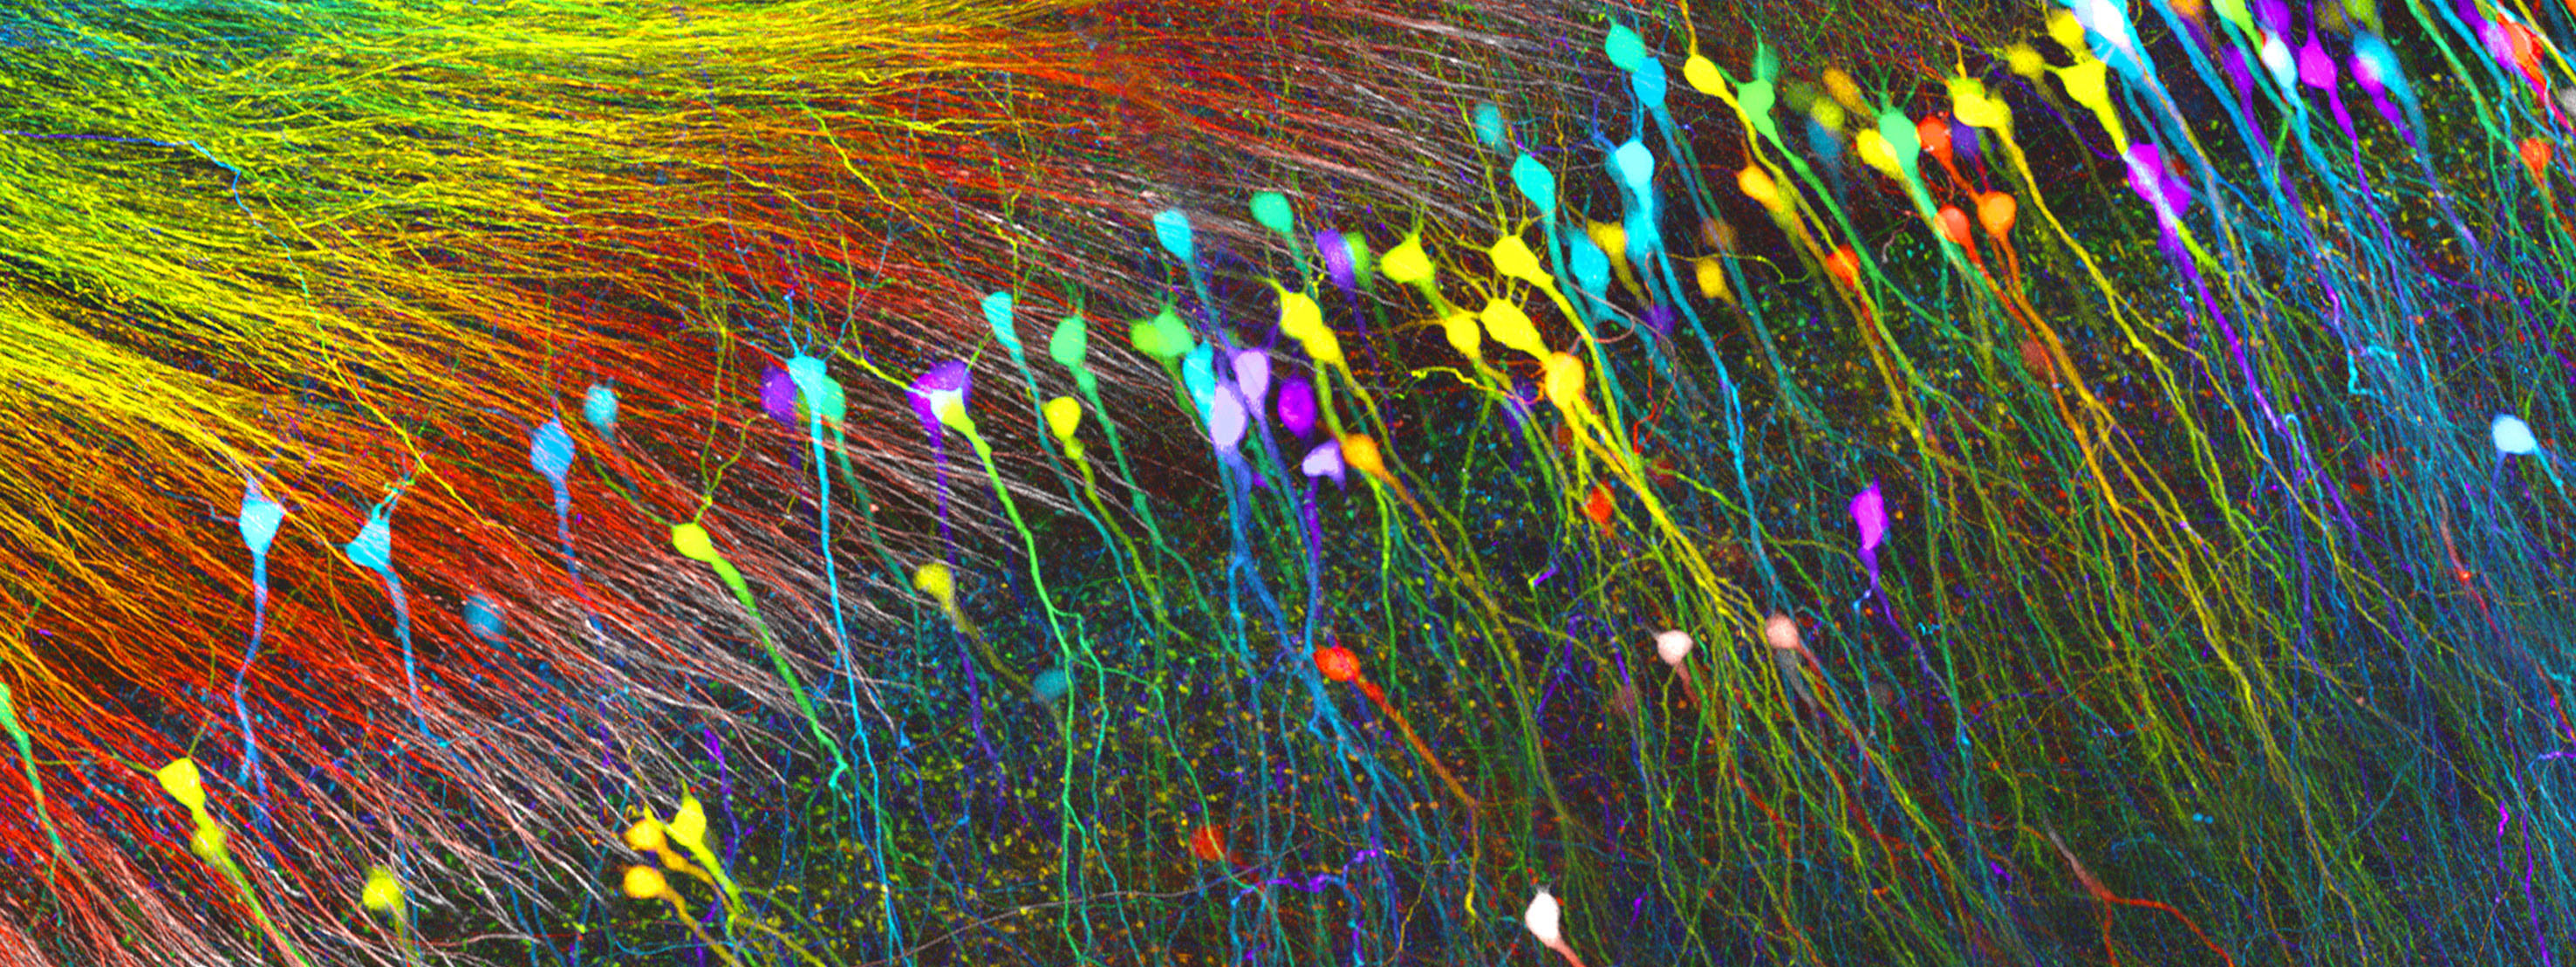 Is there human hippocampal neurogenesis?